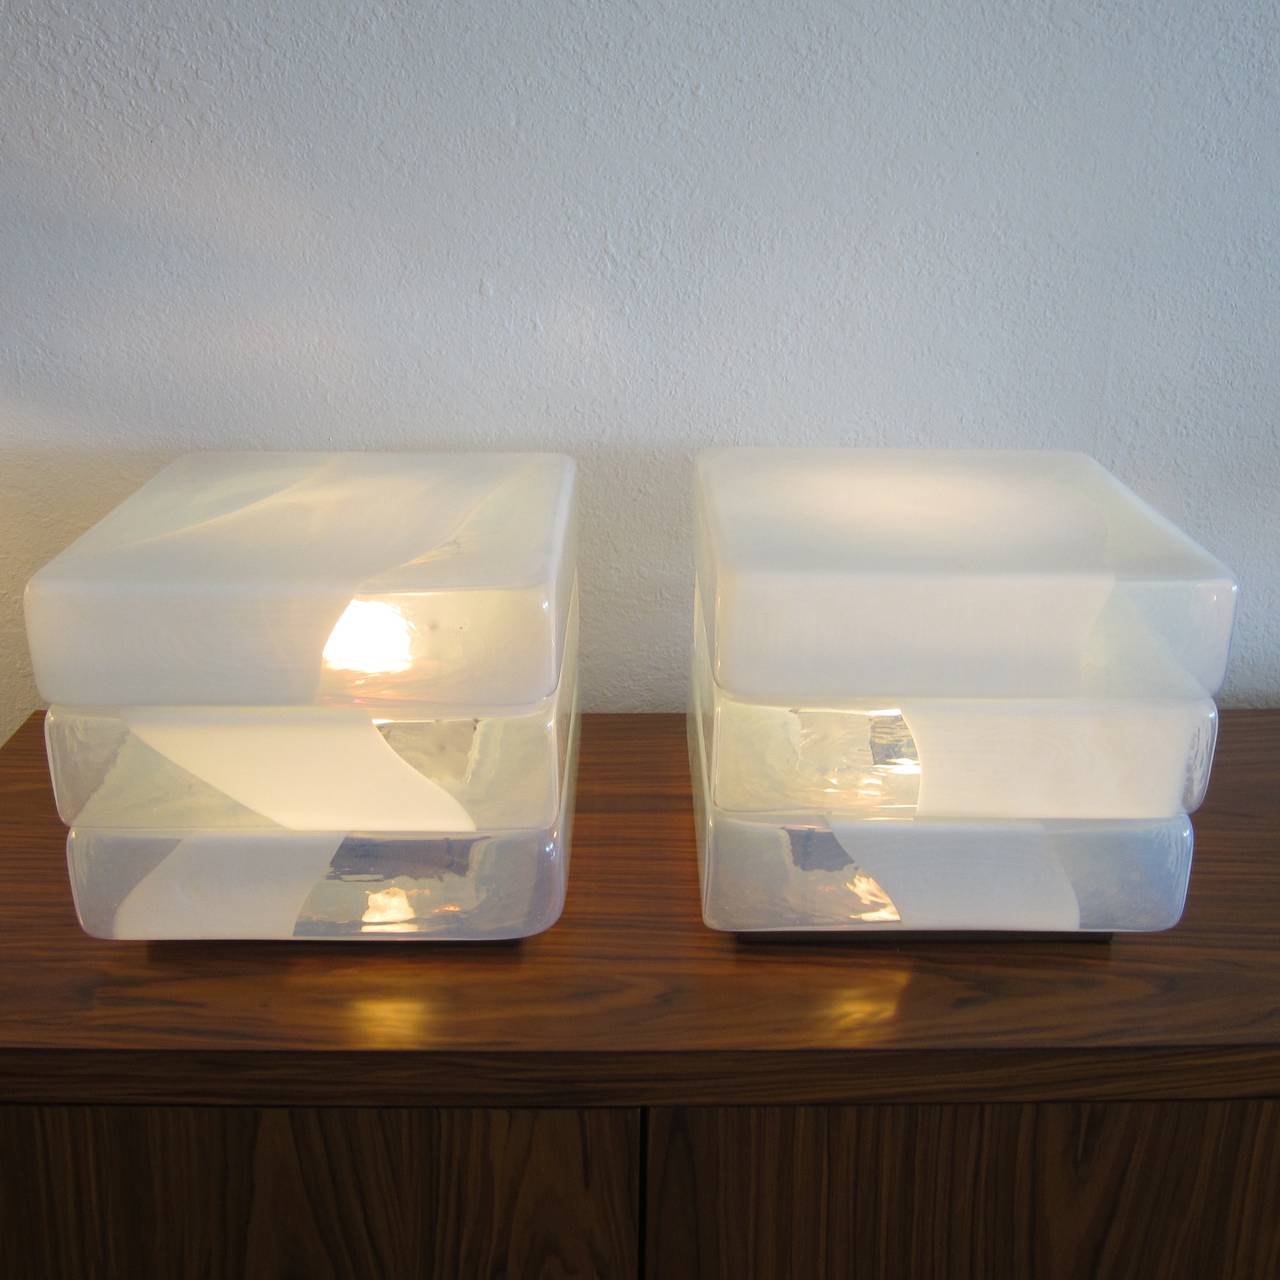 A rare find pair of handblown Murano glass stacked cube lamps designed by Carlo Nason for Mazzega. 
The stacked cubes have organic color variations of opaque blue and white. Sold as a pair. Beautiful colors and warm glow when on. Great for the